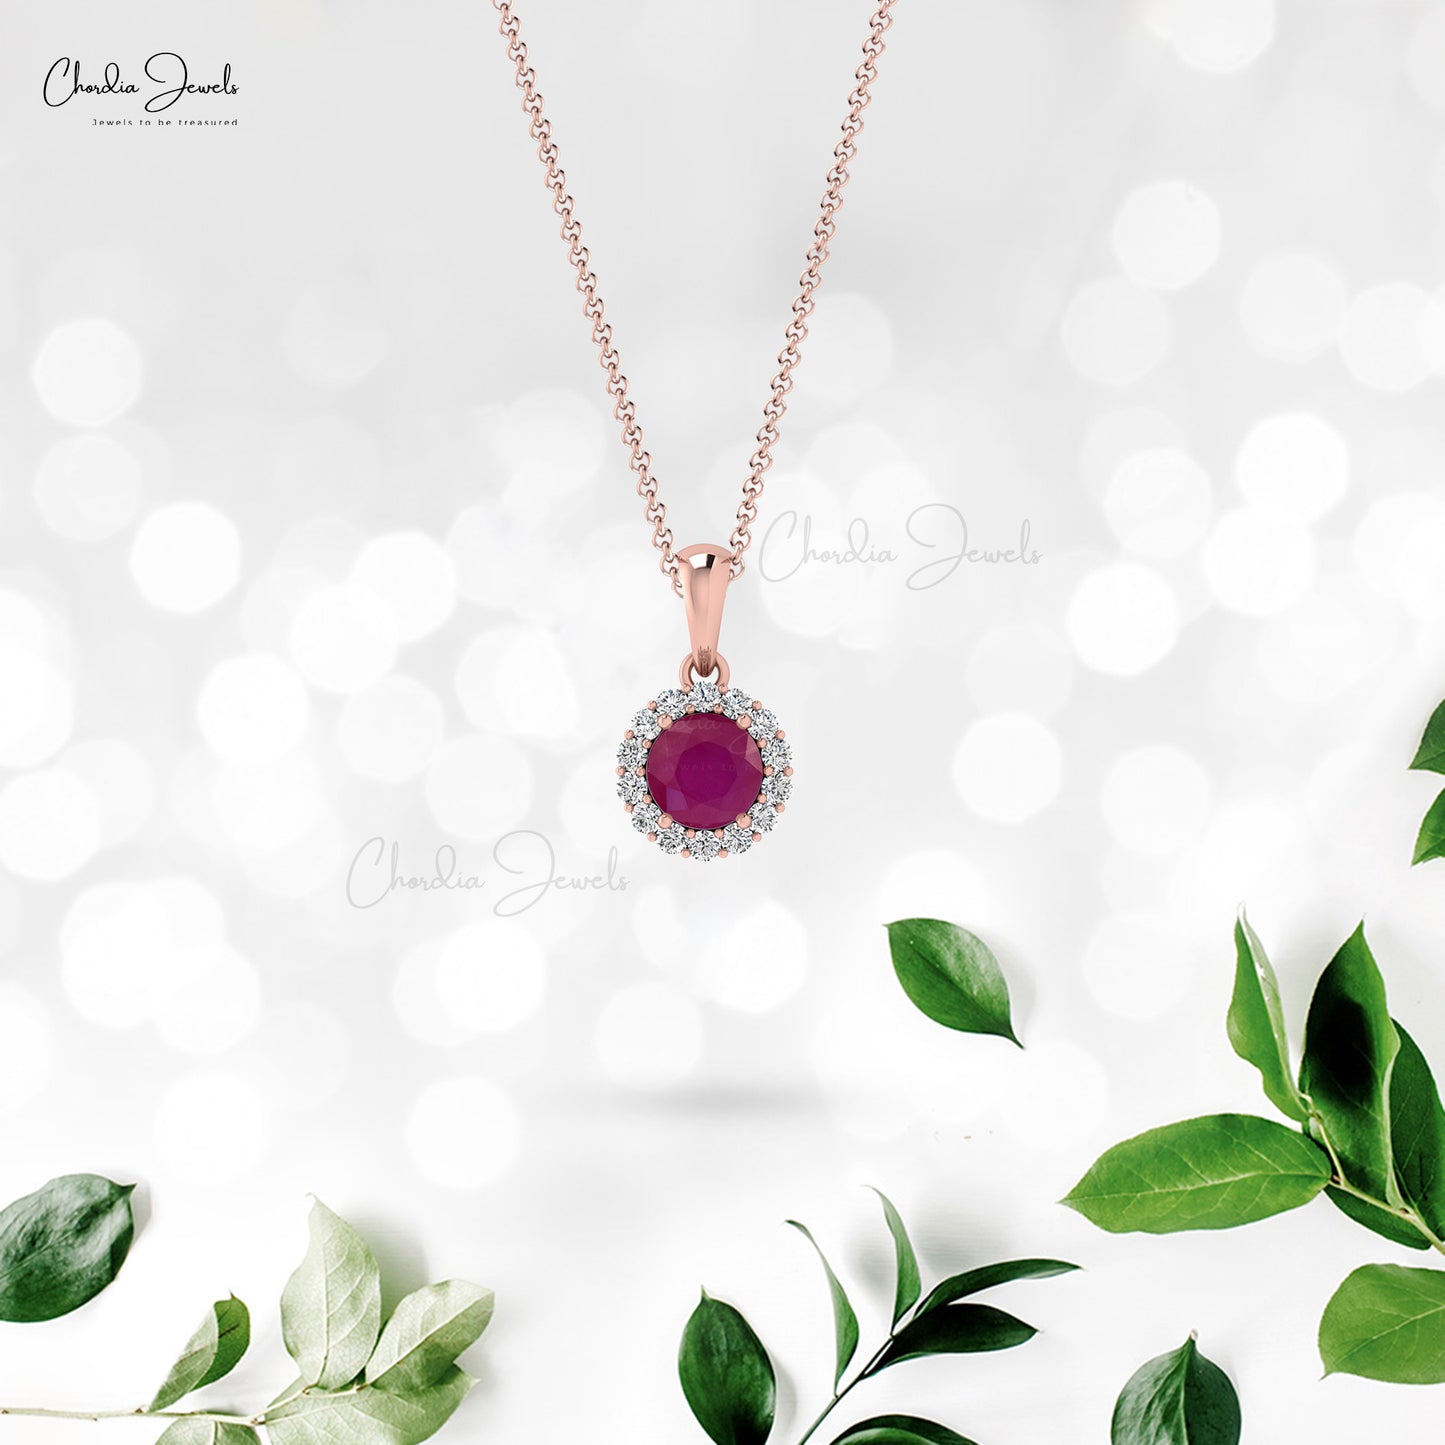 Load image into Gallery viewer, Round Cut 4mm Genuine Ruby Gemstone with Diamond Halo Pendant
